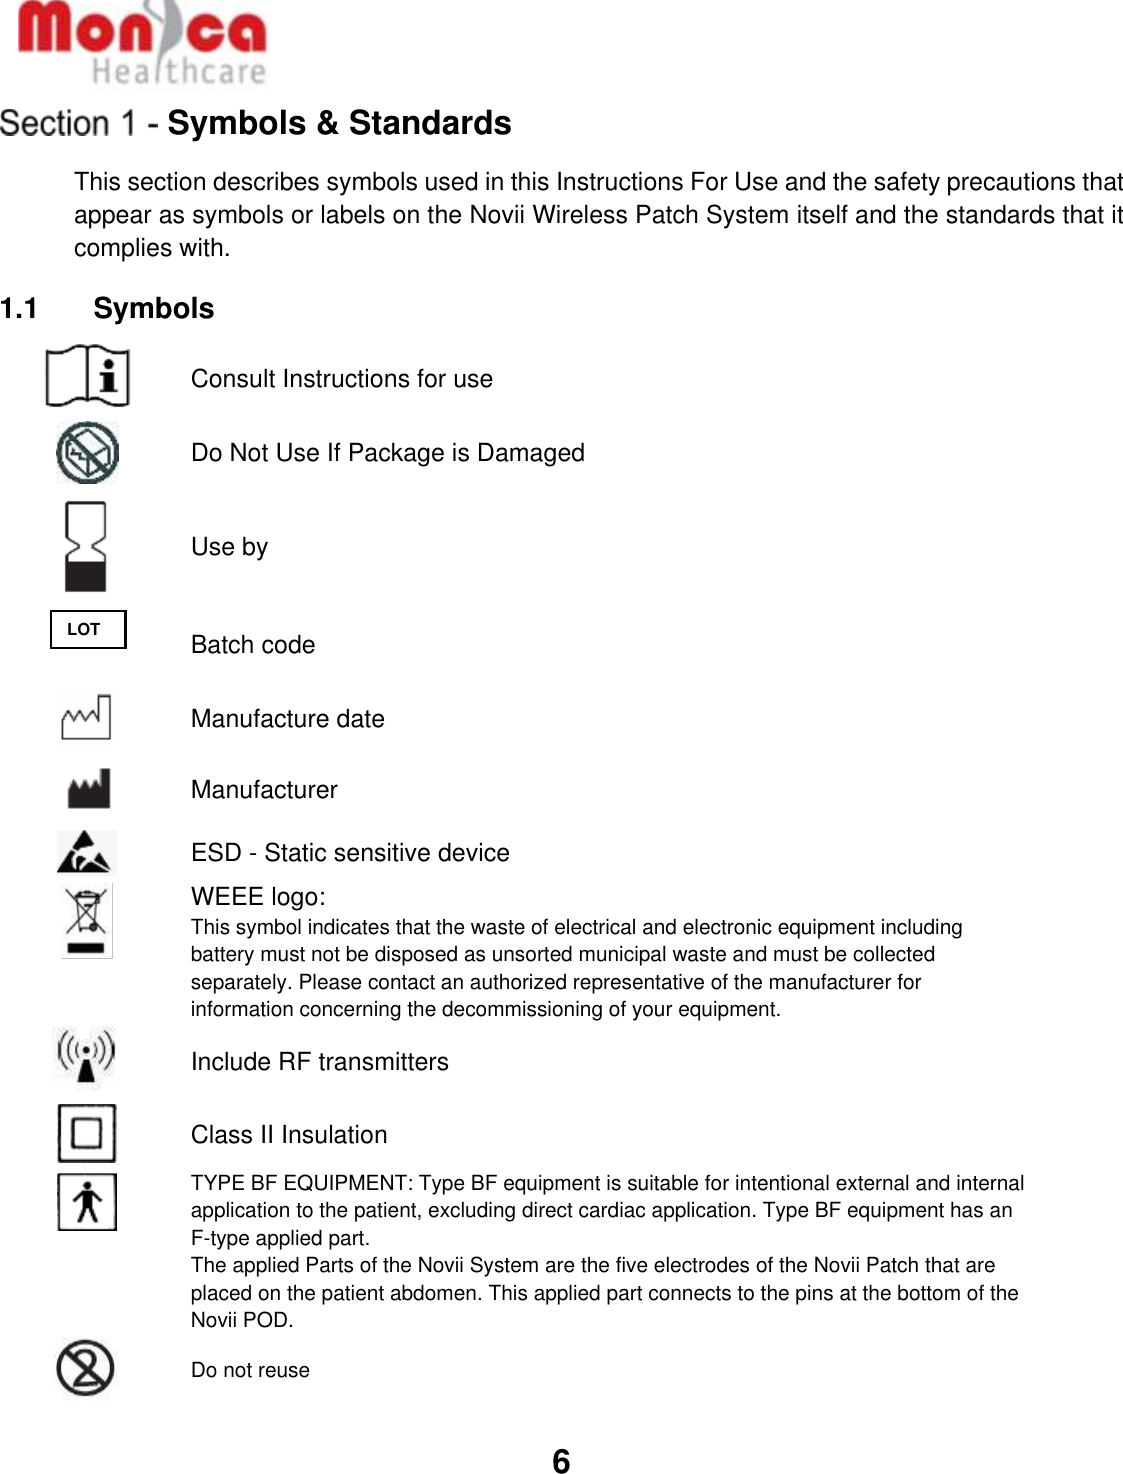   6  Symbols &amp; Standards This section describes symbols used in this Instructions For Use and the safety precautions that appear as symbols or labels on the Novii Wireless Patch System itself and the standards that it complies with.  1.1    Symbols  Consult Instructions for use  Do Not Use If Package is Damaged  Use by  Batch code  Manufacture date  Manufacturer  ESD - Static sensitive device  WEEE logo: This symbol indicates that the waste of electrical and electronic equipment including battery must not be disposed as unsorted municipal waste and must be collected separately. Please contact an authorized representative of the manufacturer for information concerning the decommissioning of your equipment.  Include RF transmitters  Class II Insulation  TYPE BF EQUIPMENT: Type BF equipment is suitable for intentional external and internal application to the patient, excluding direct cardiac application. Type BF equipment has an F-type applied part. The applied Parts of the Novii System are the five electrodes of the Novii Patch that are placed on the patient abdomen. This applied part connects to the pins at the bottom of the Novii POD.  Do not reuse LOT 